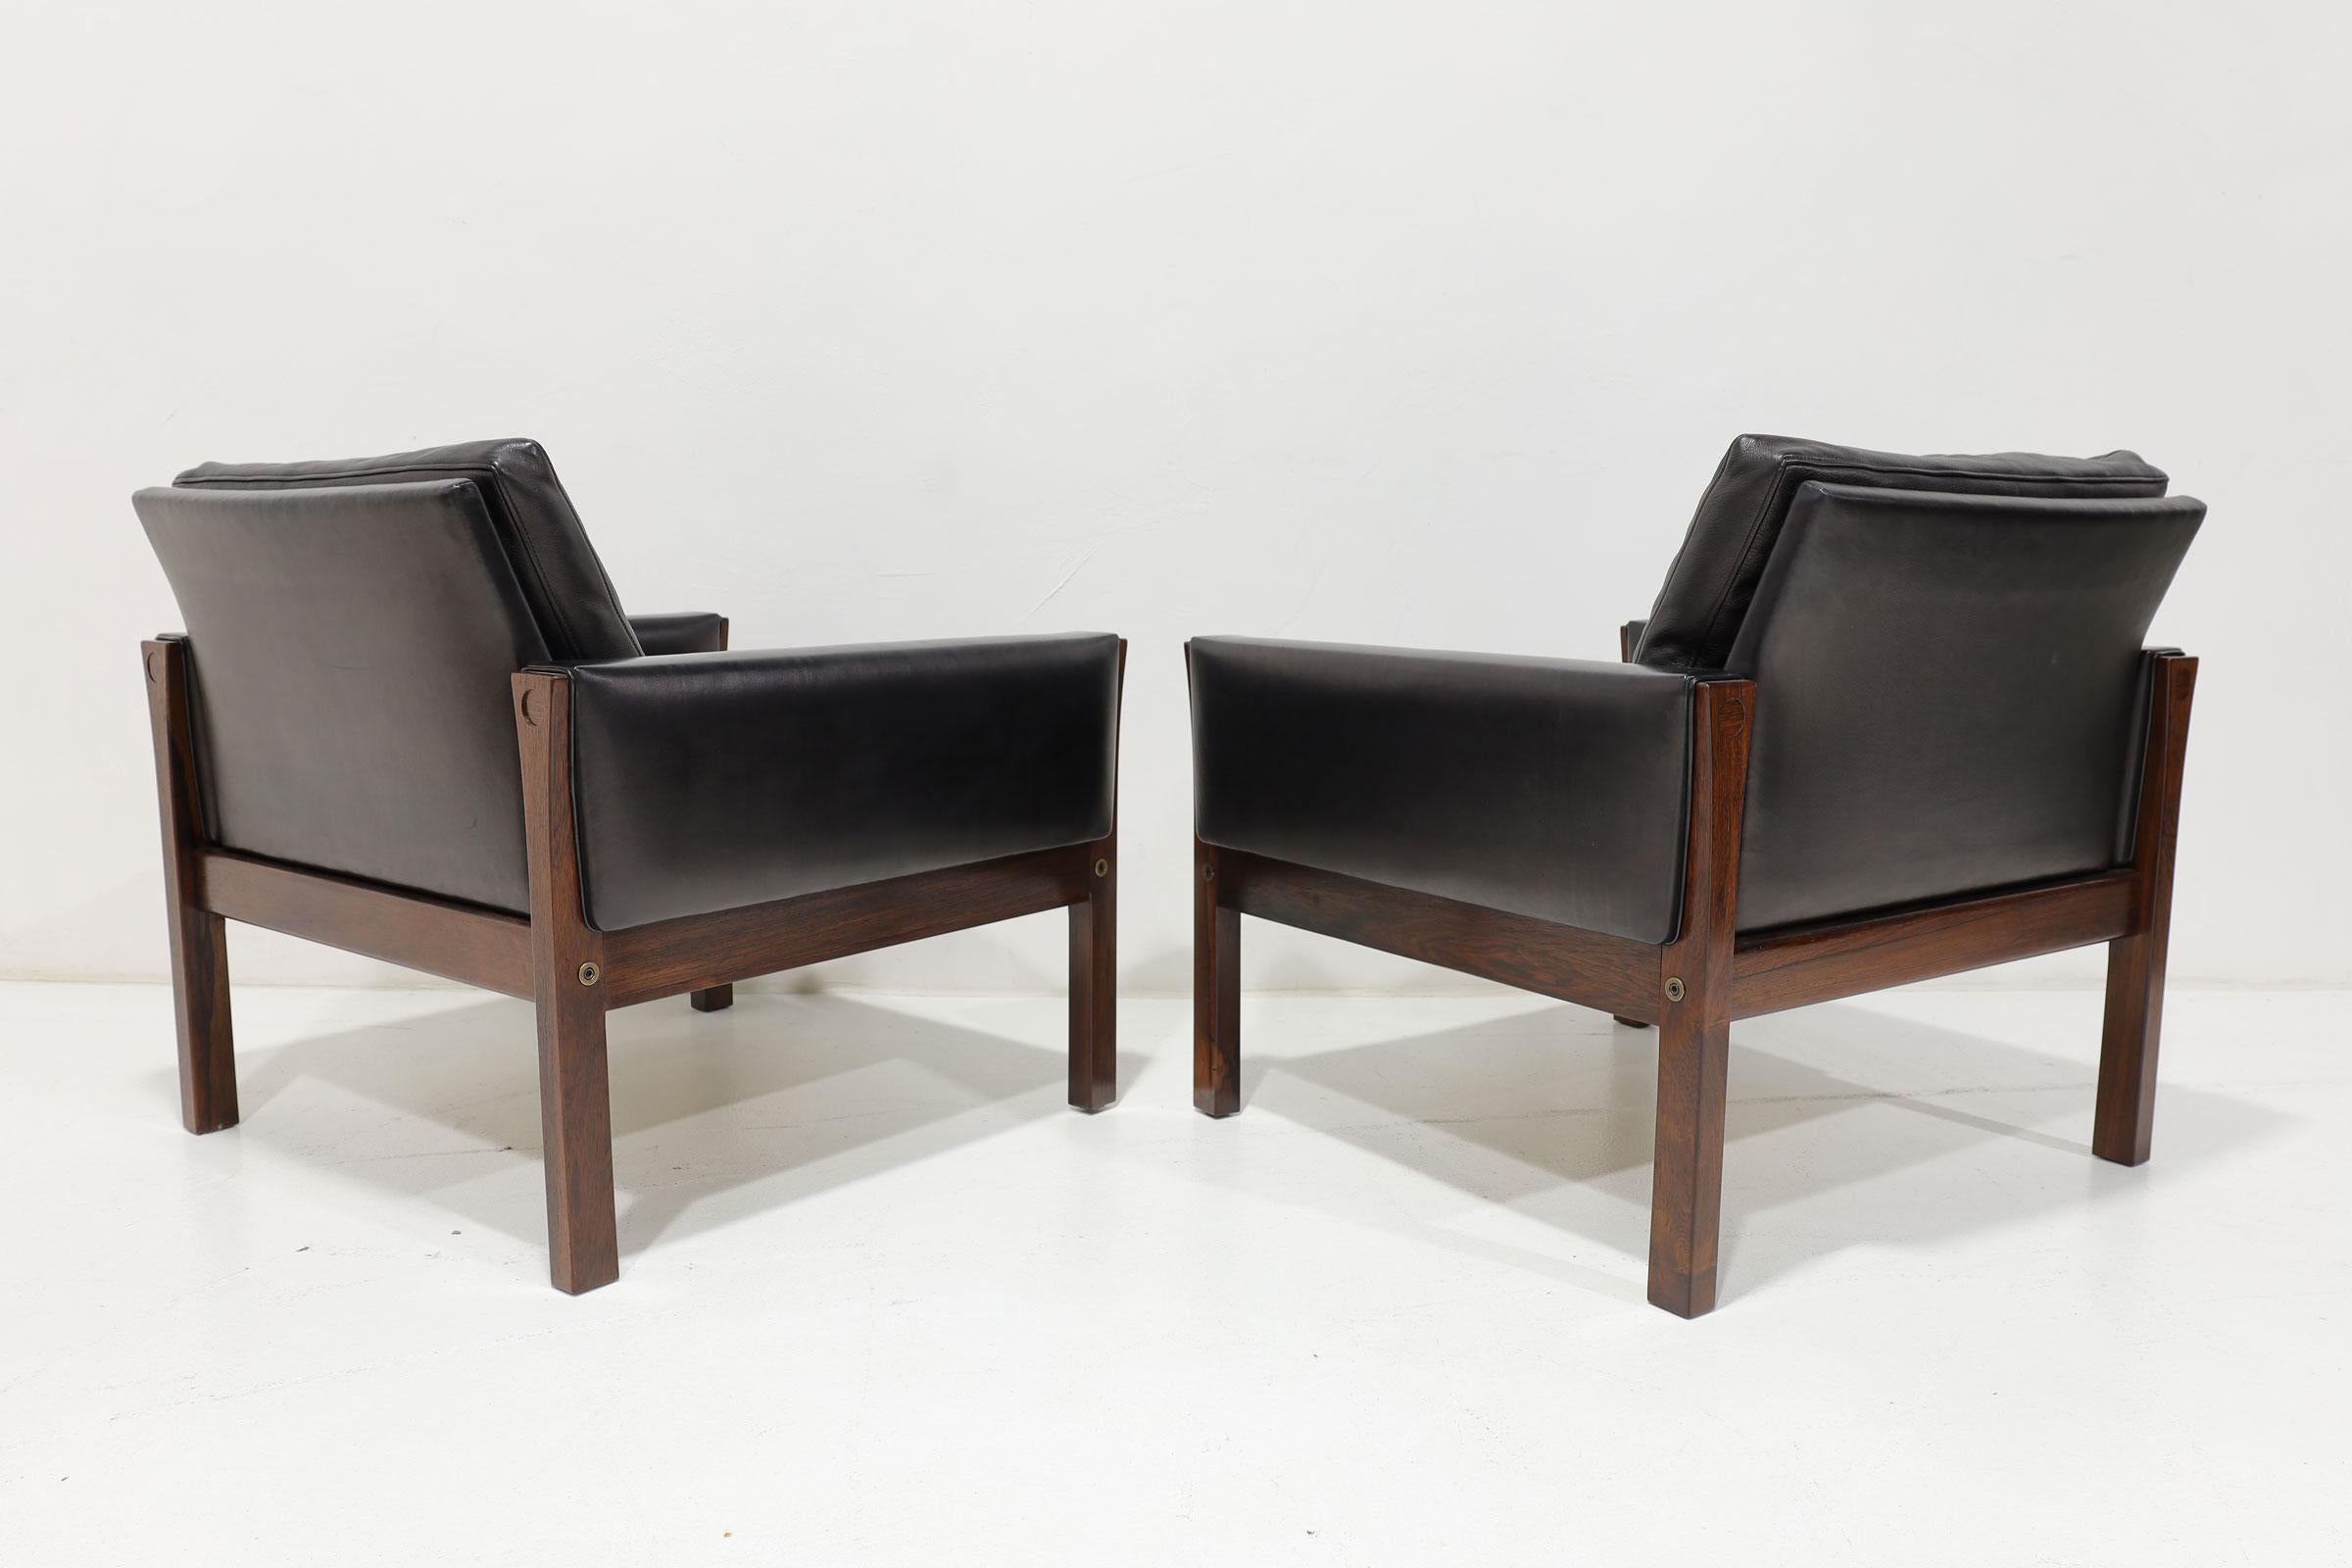 20th Century Hans Wegner Model AP 62 Lounge Chairs in Rosewood and Black Leather